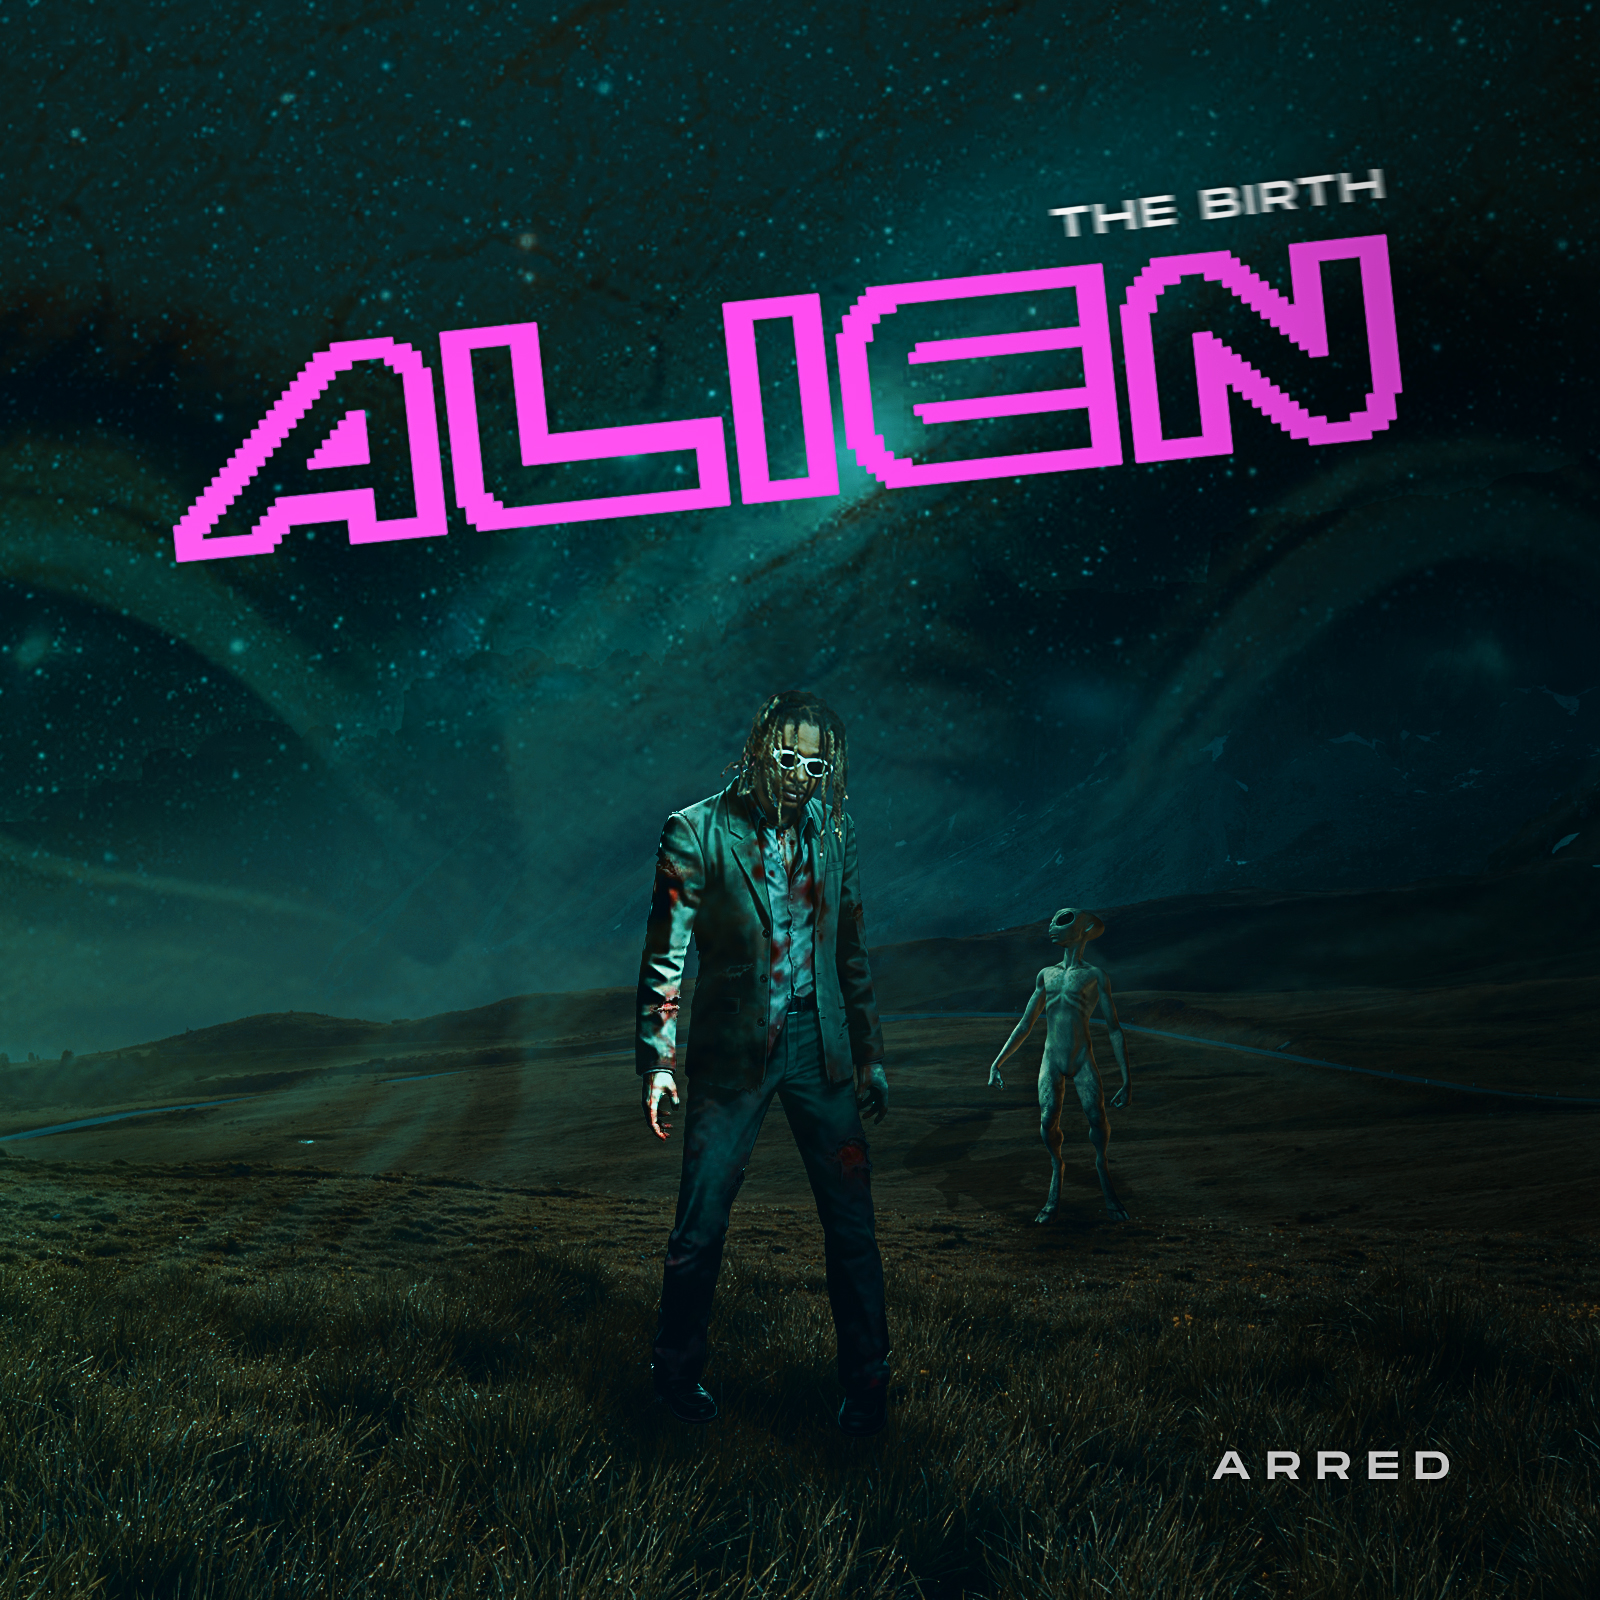 Arred (@arredthealien) introduces a fresh space afrobeat sound with new extended play album Alien , The Birth